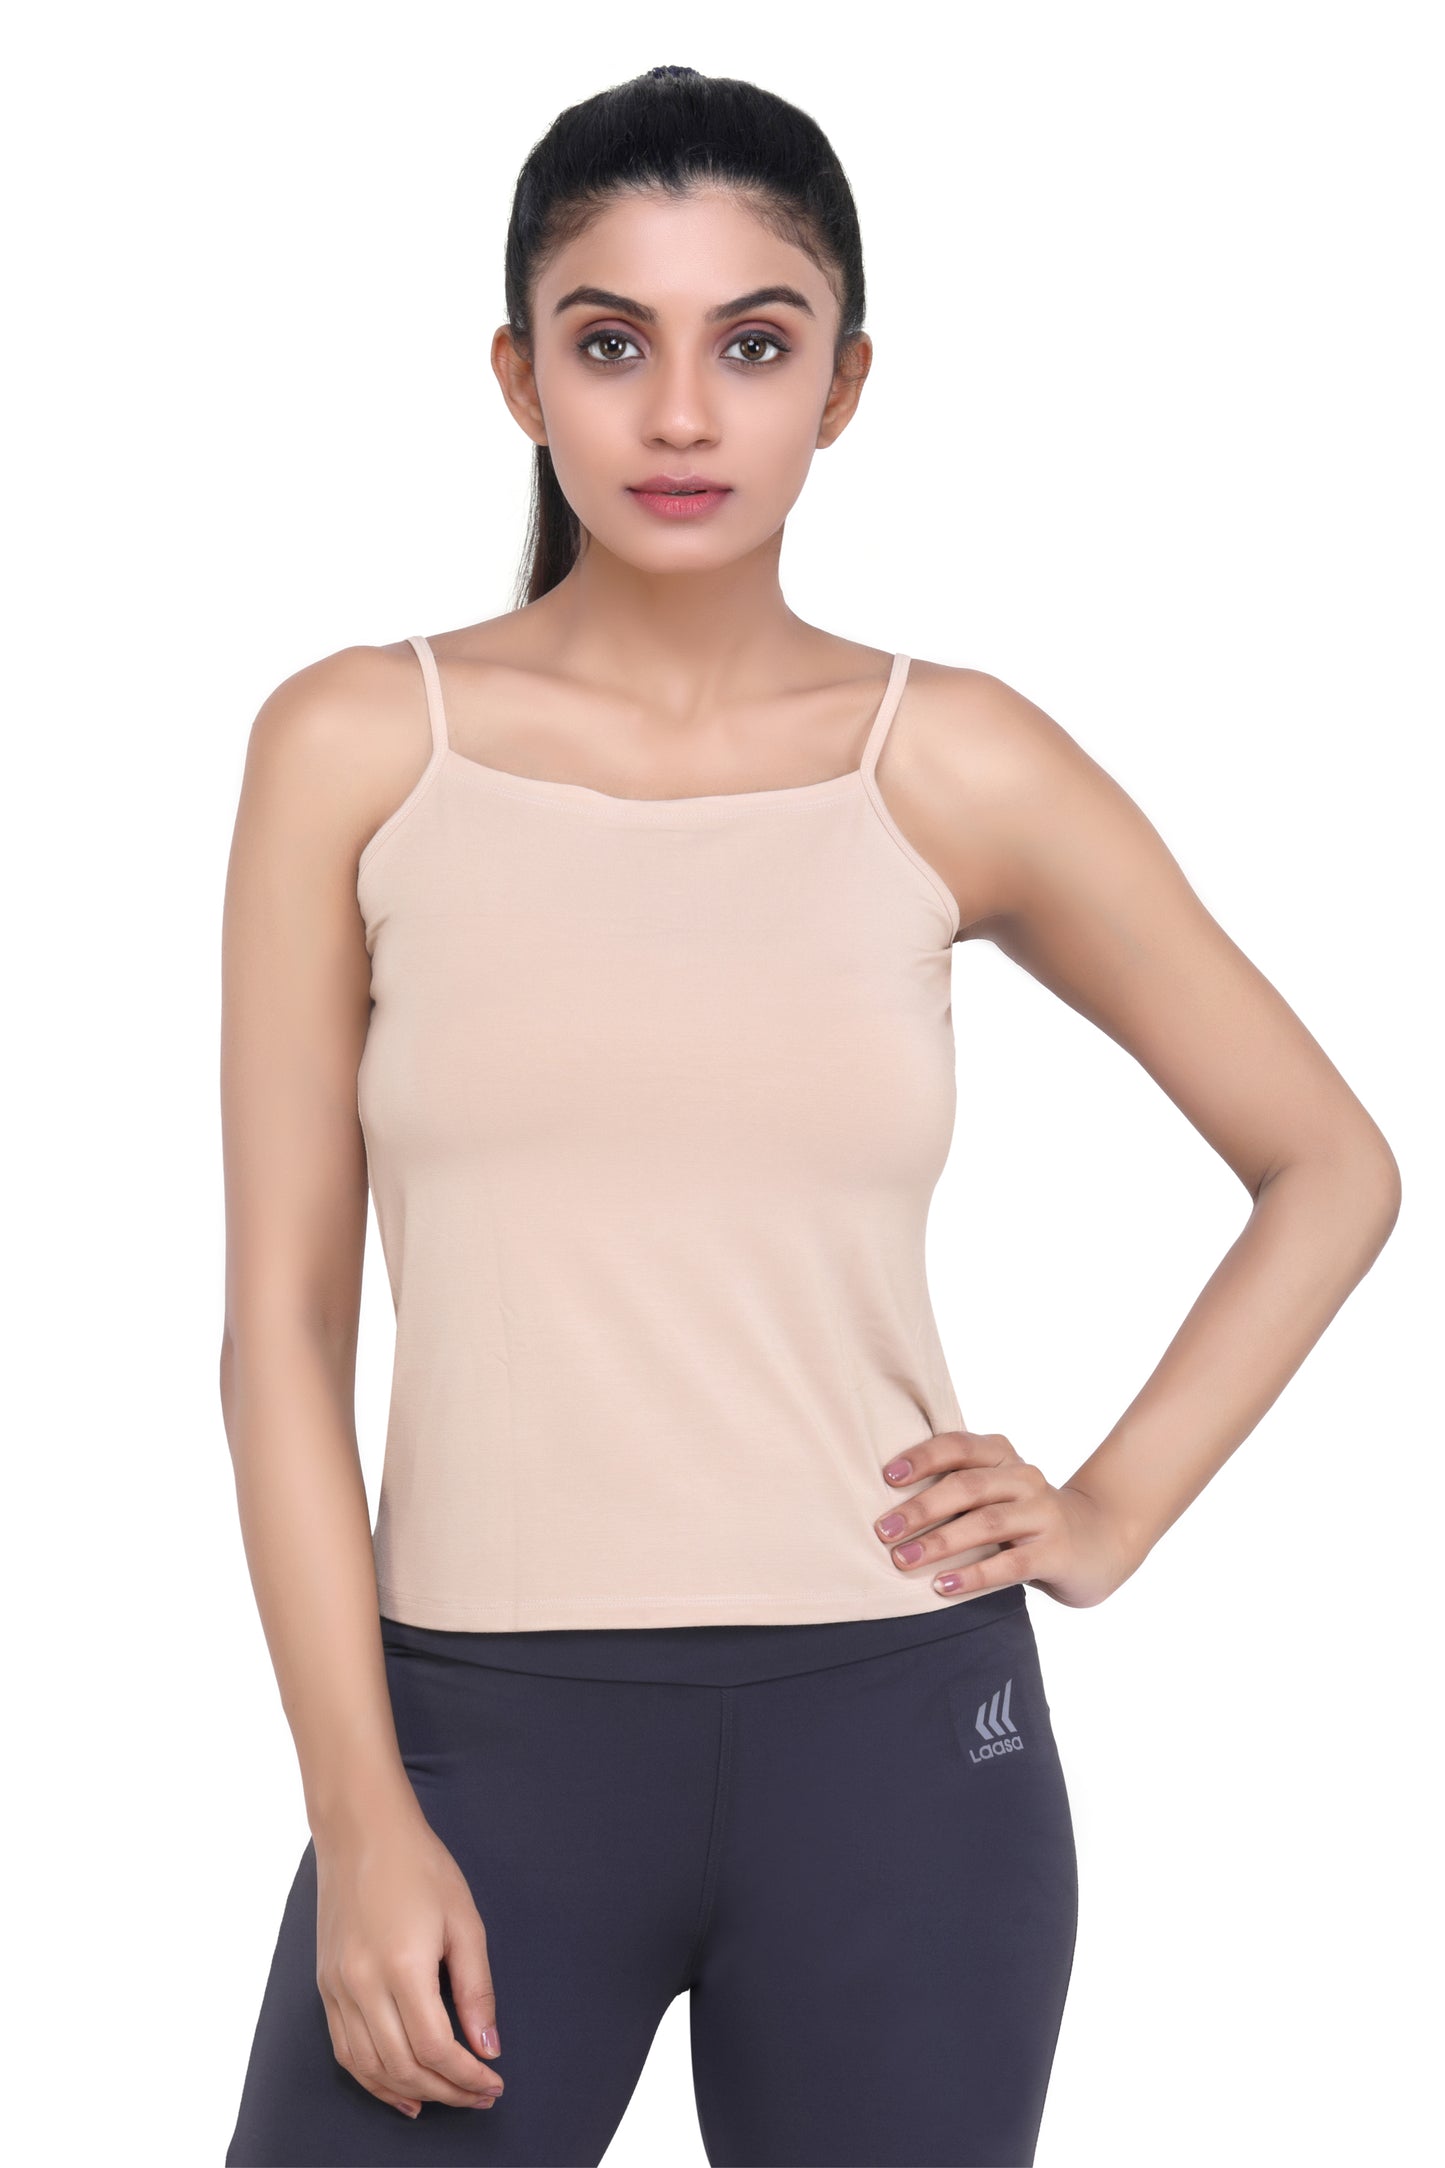 WOMEN'S CLASSIC CAMISOLE SLIP INNER & OUTER WEAR